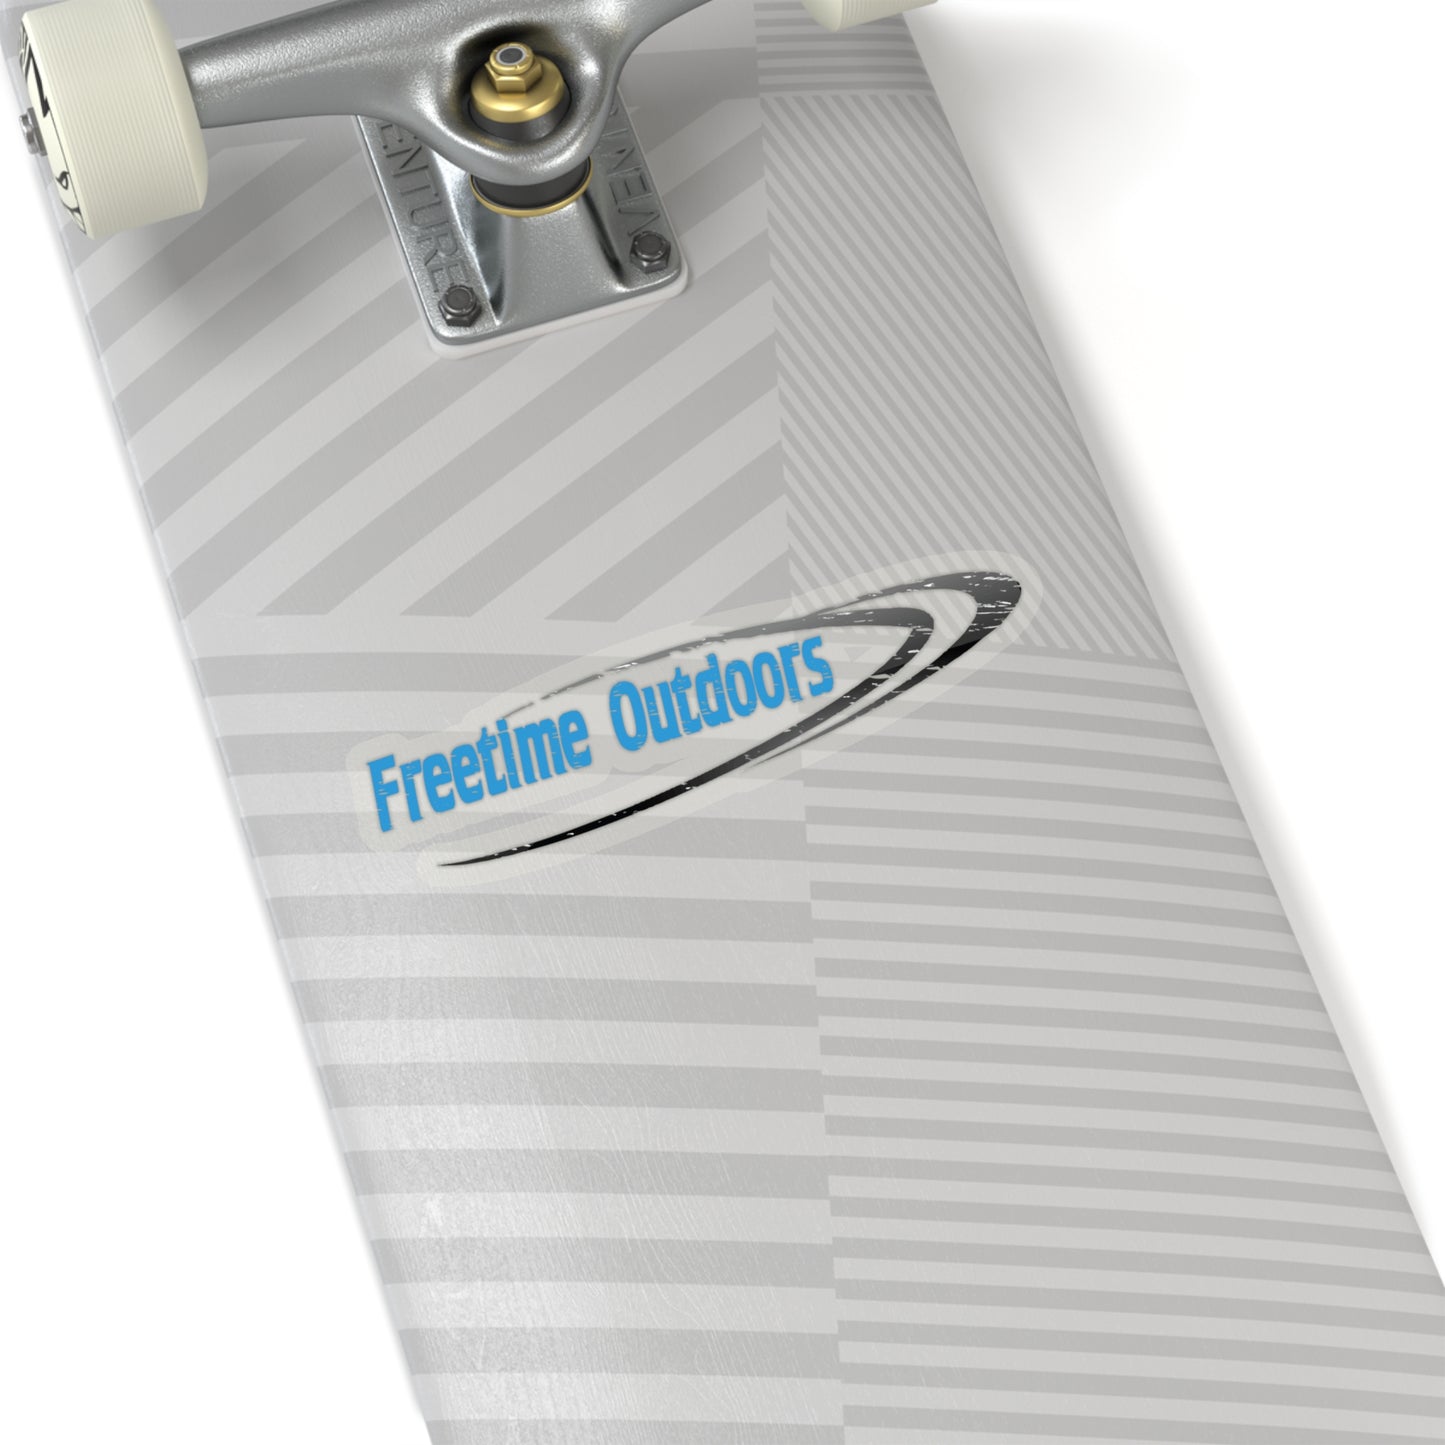 Freetime Outdoors Stickers Blue & Black